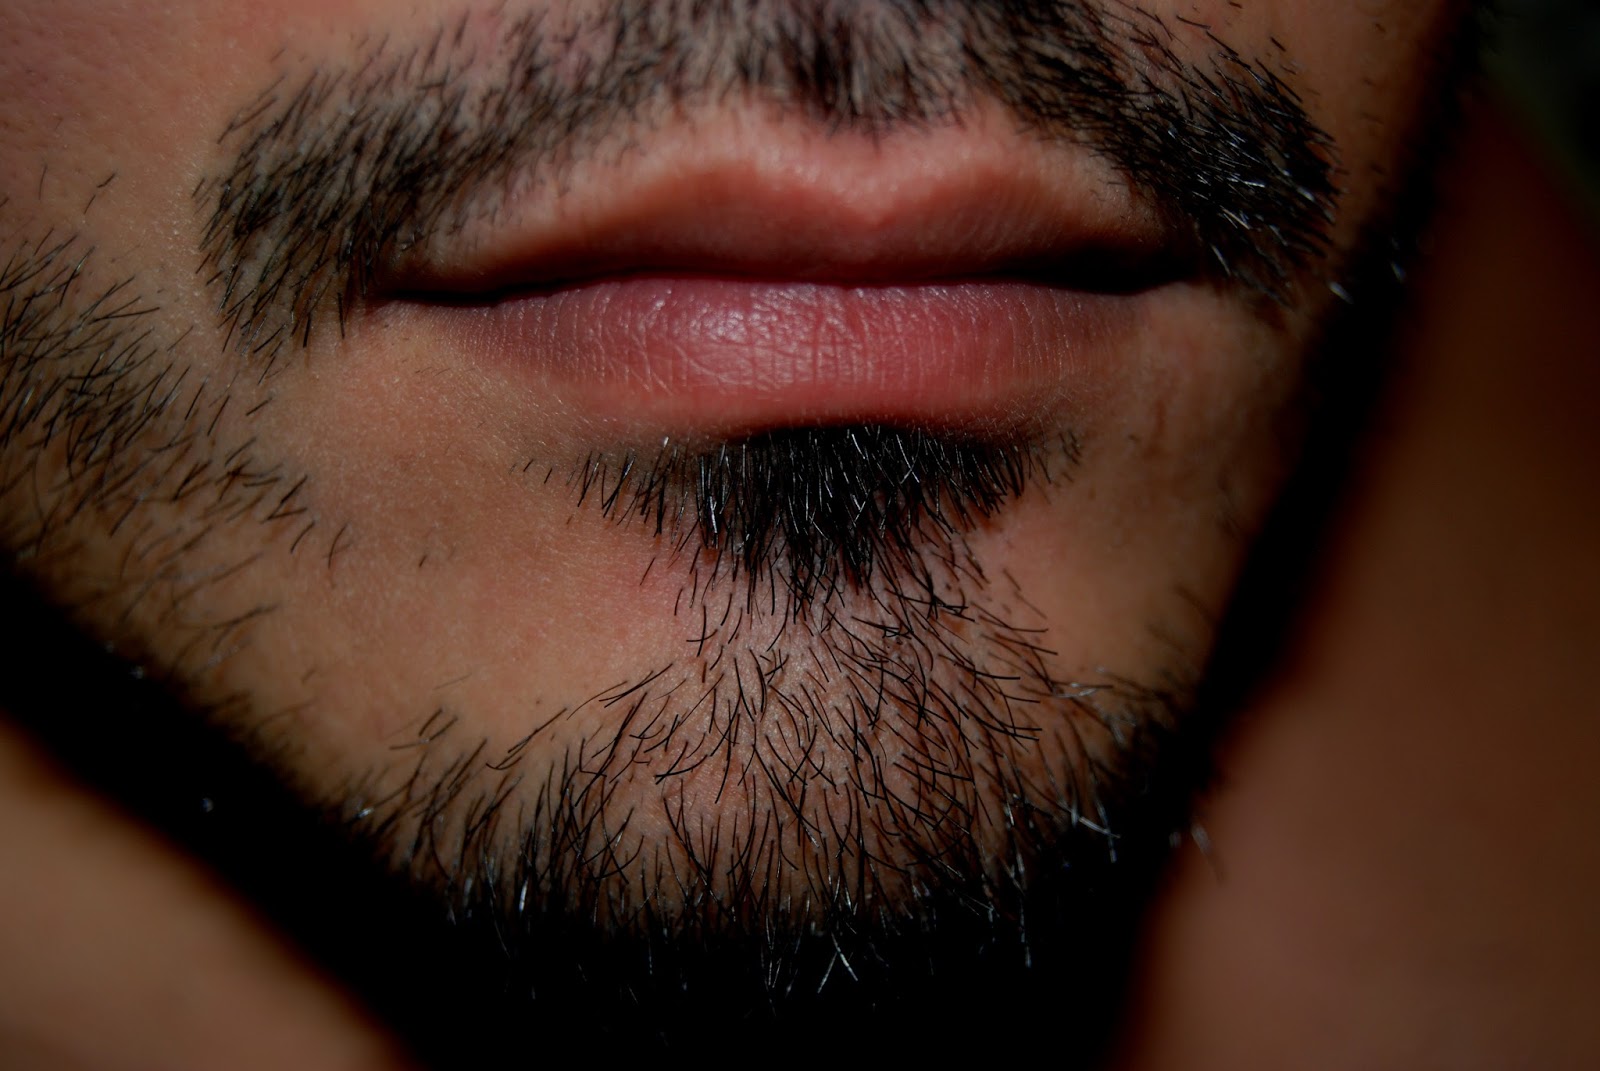 The Man With Pretty Lips 4 CHEEKY LITTLE GROOMING TIPS FOR MEN ~ THE MALE GROOMING REVIEW